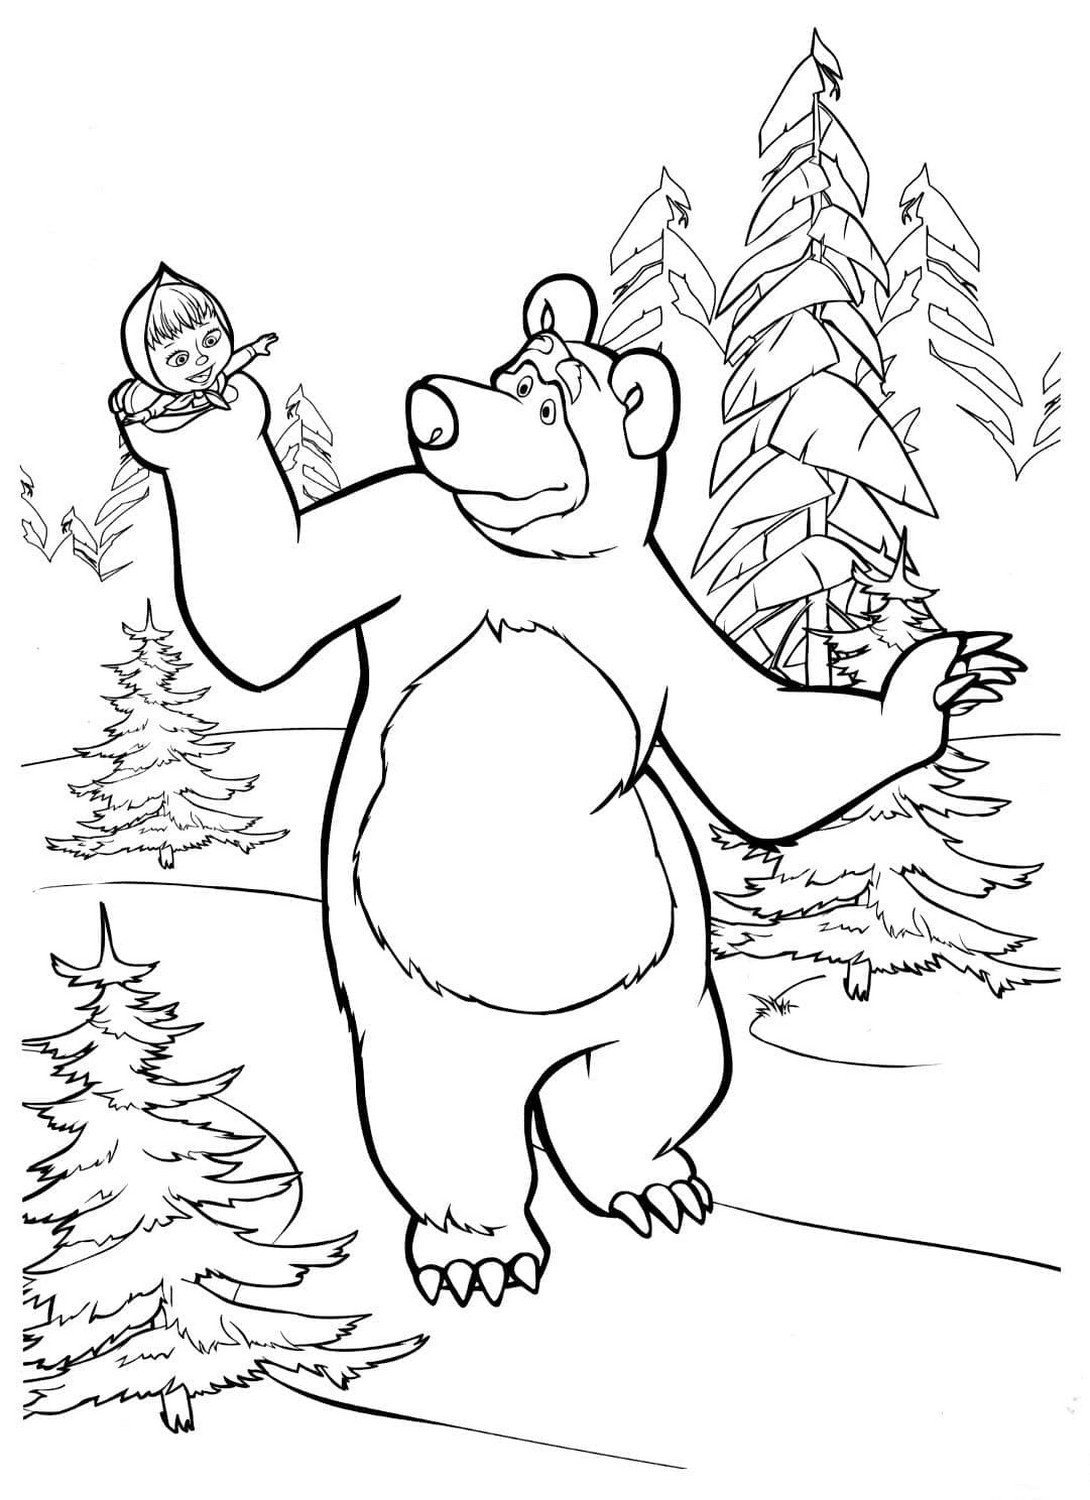 Drawing 32 of Masha and the Bear to print and color